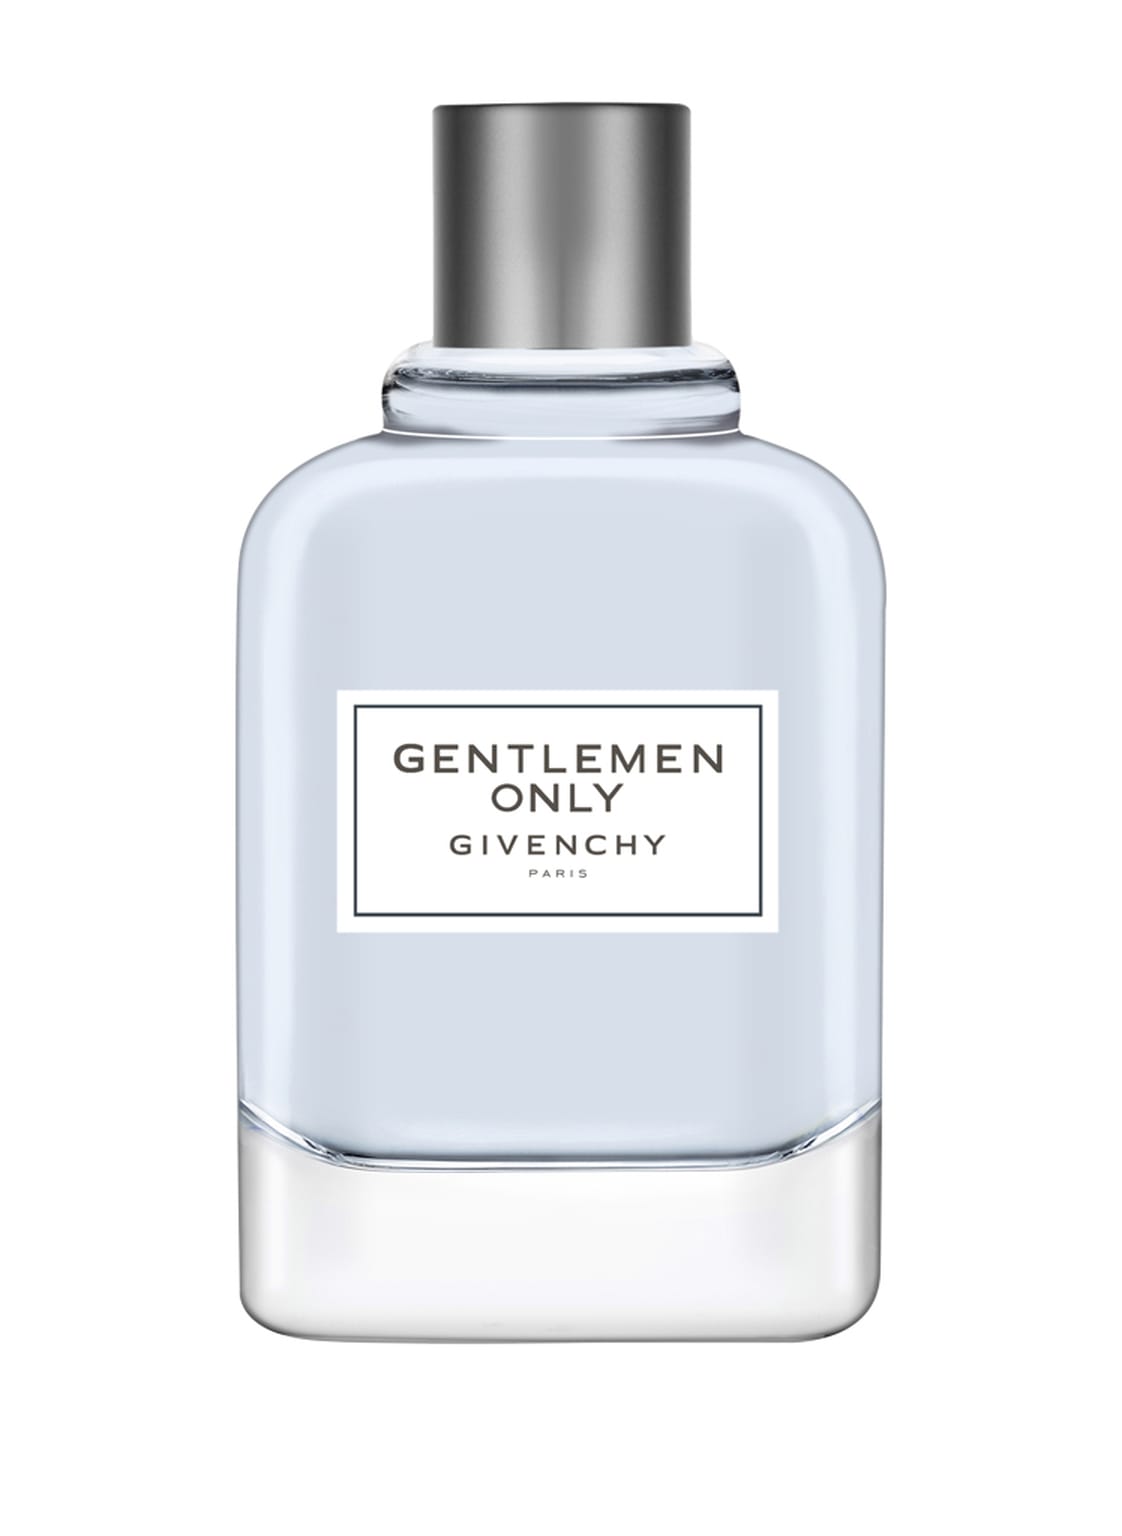 Givenchy Beauty Gentlemen Only Givenchy Eau de Toilette 100 ml von GIVENCHY BEAUTY